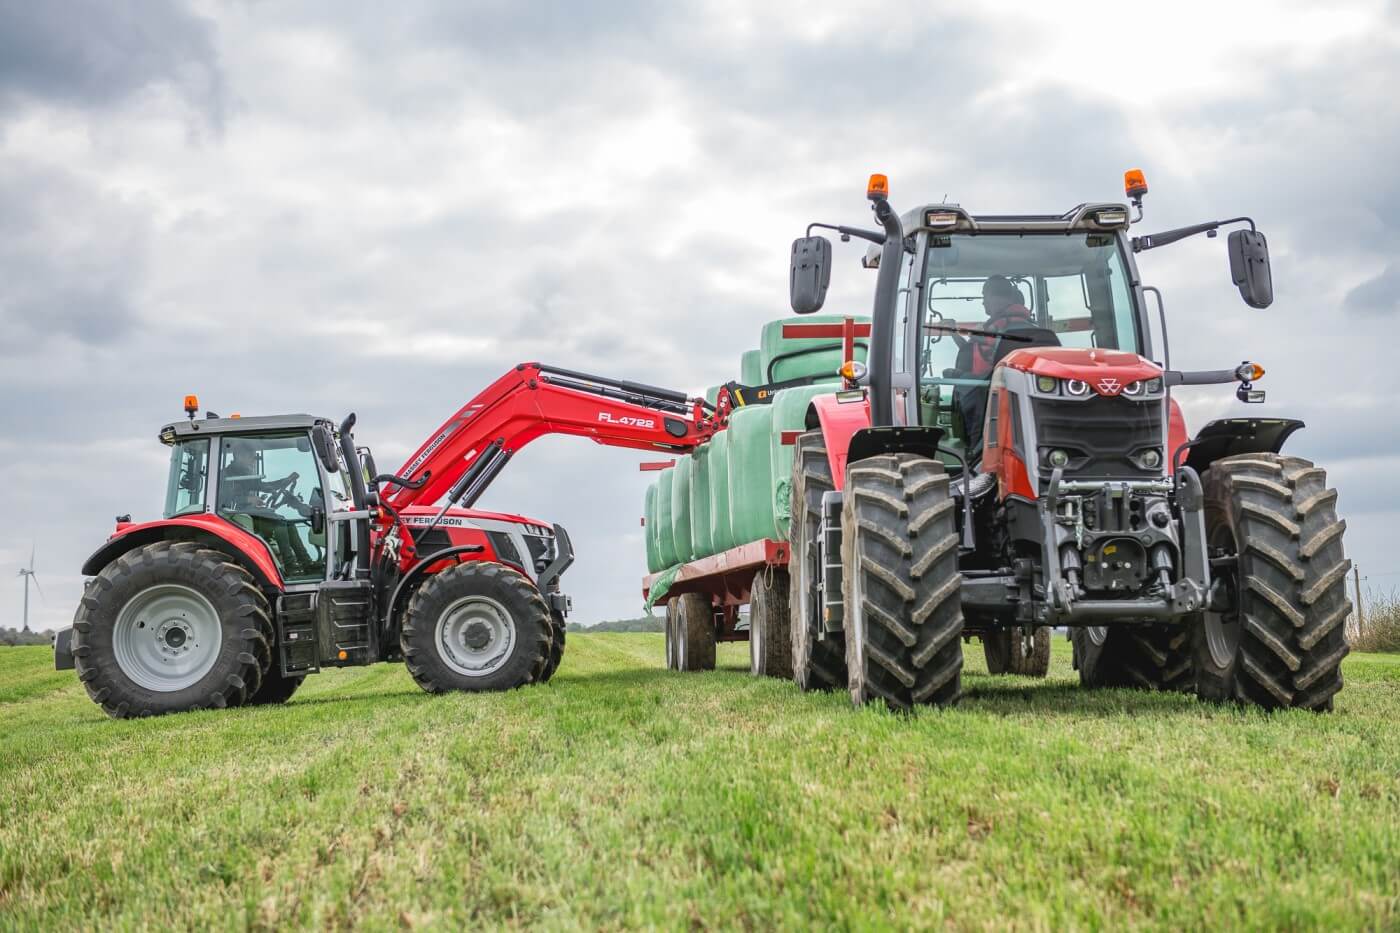 The perfect tractor-loader combination